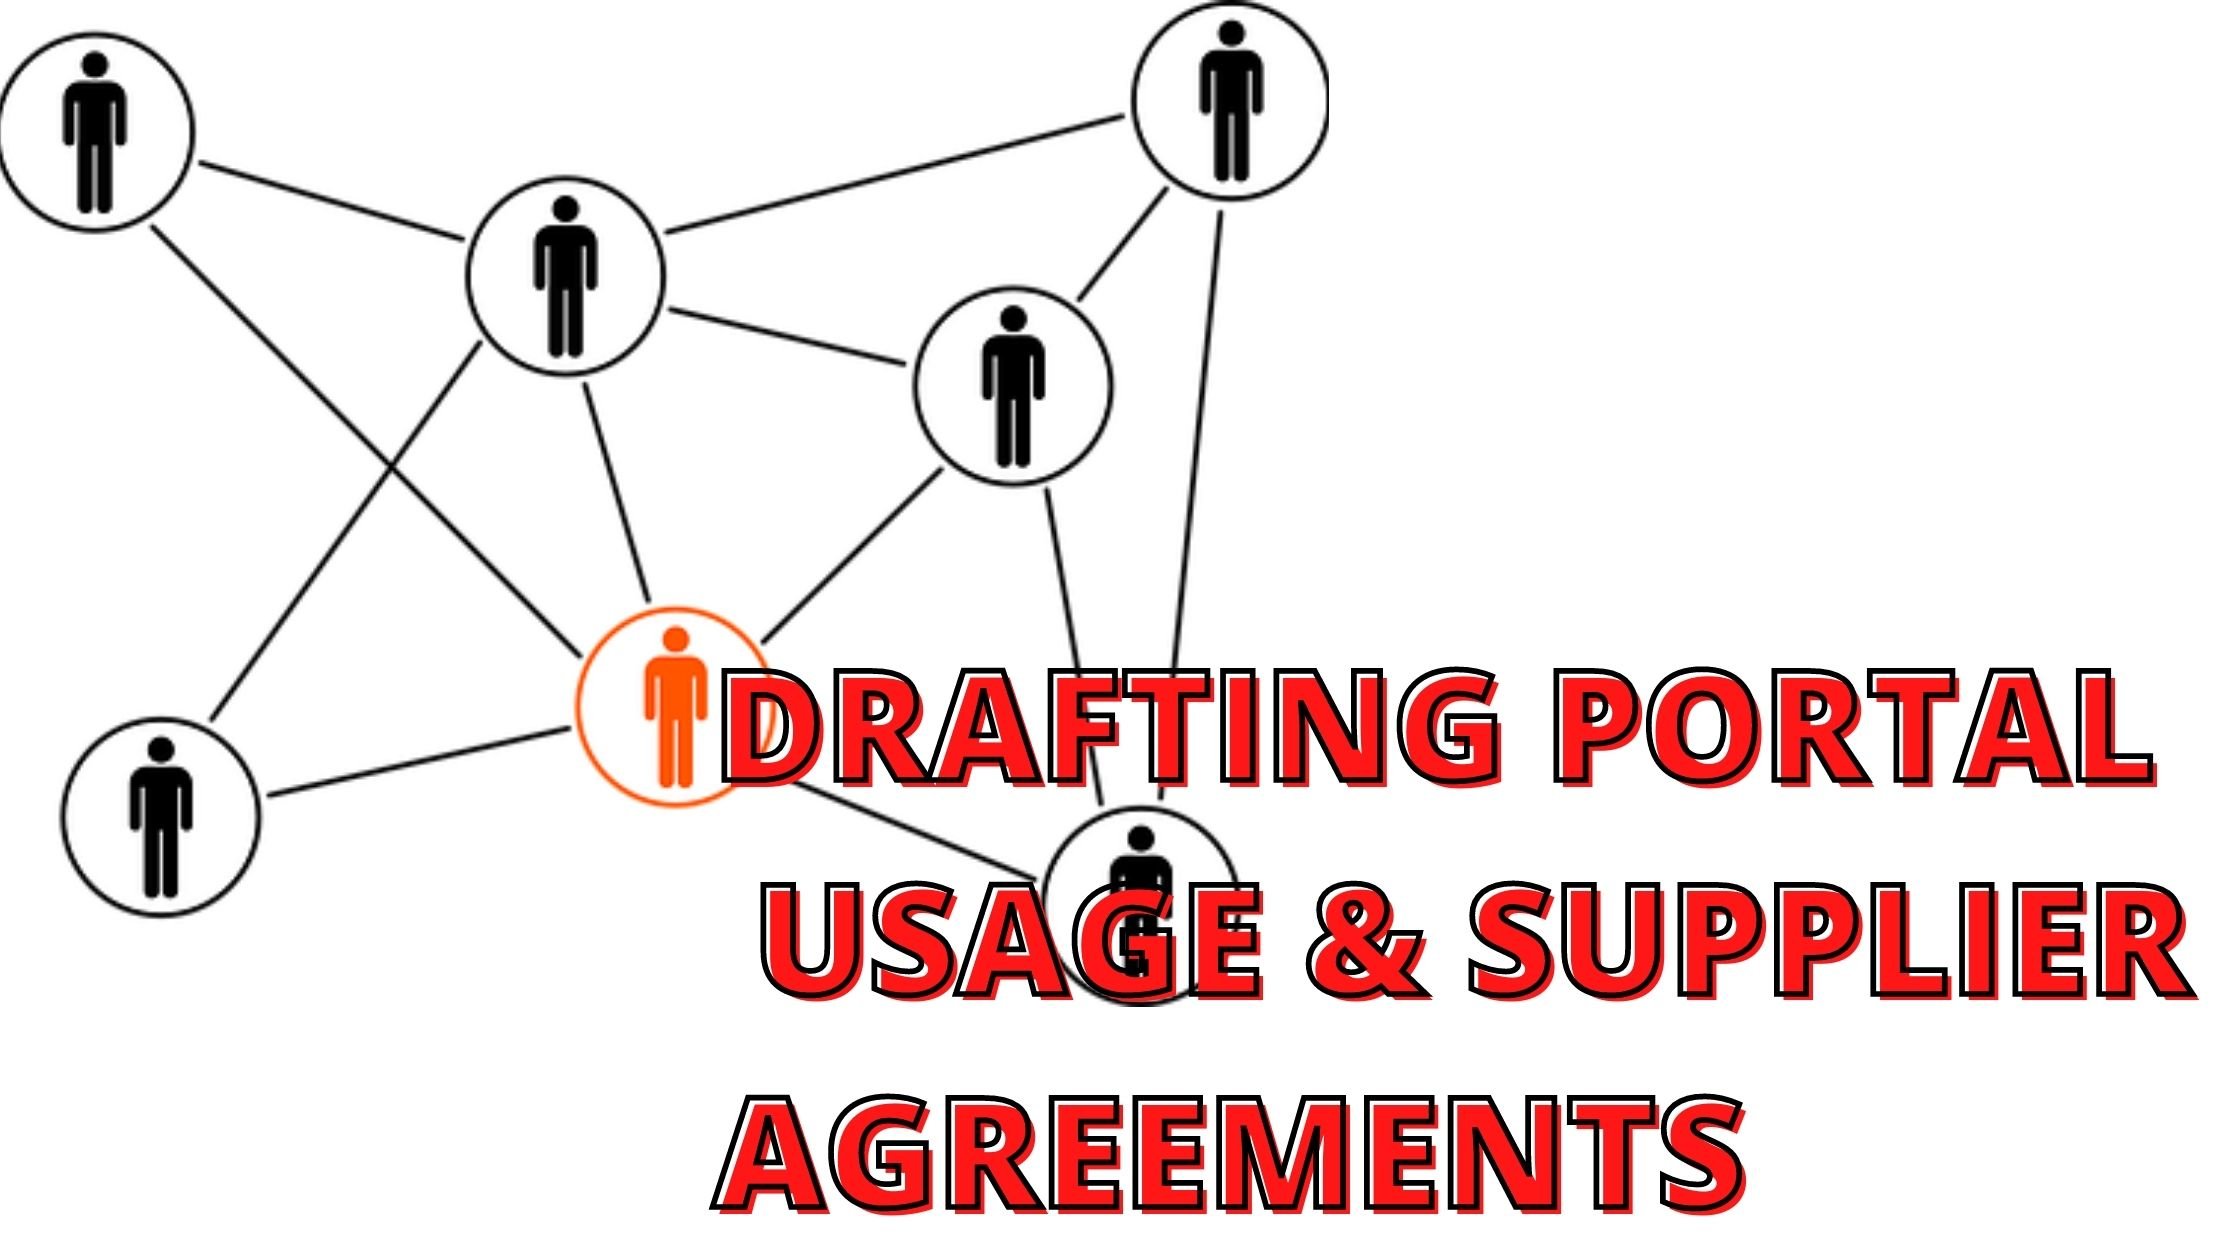  Drafting of a Portal Usage and Supplier Agreement